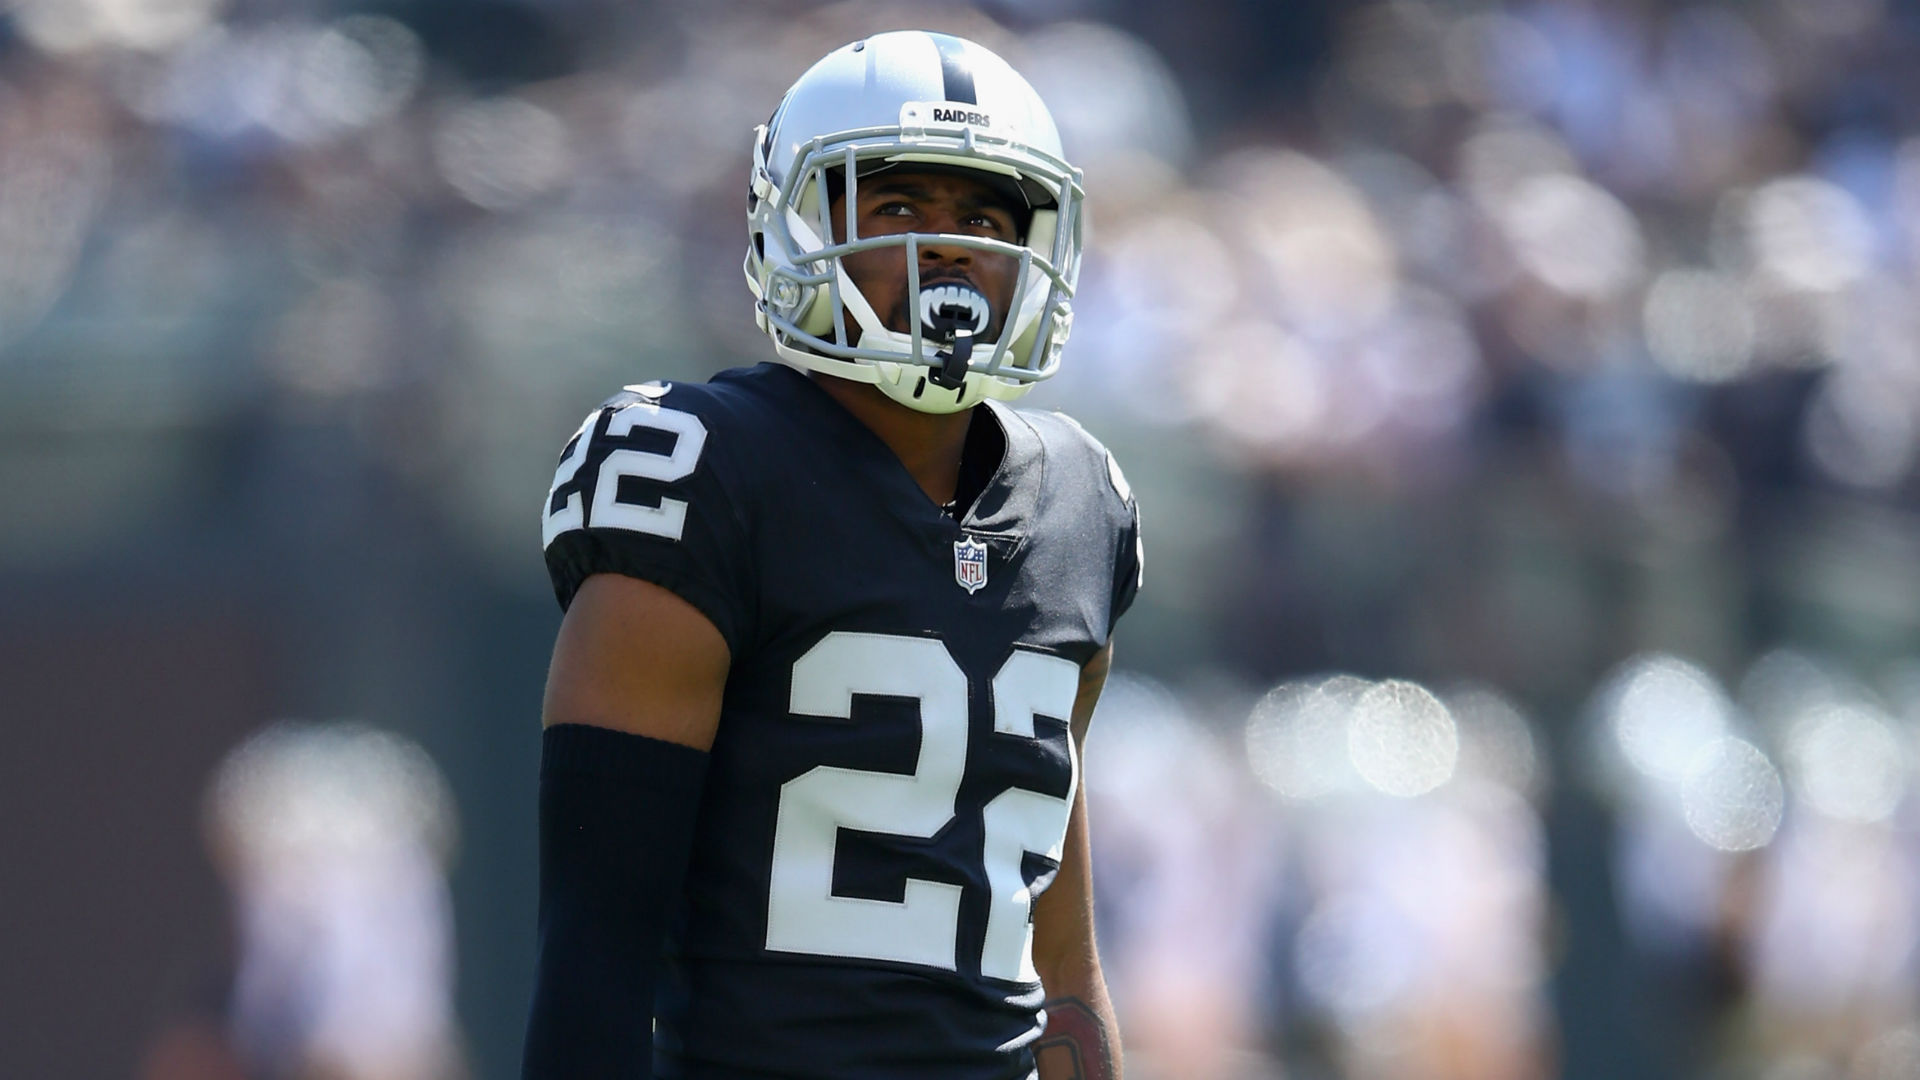 Raiders' Gareon Conley stretchered off field vs. Broncos with apparent serious injury